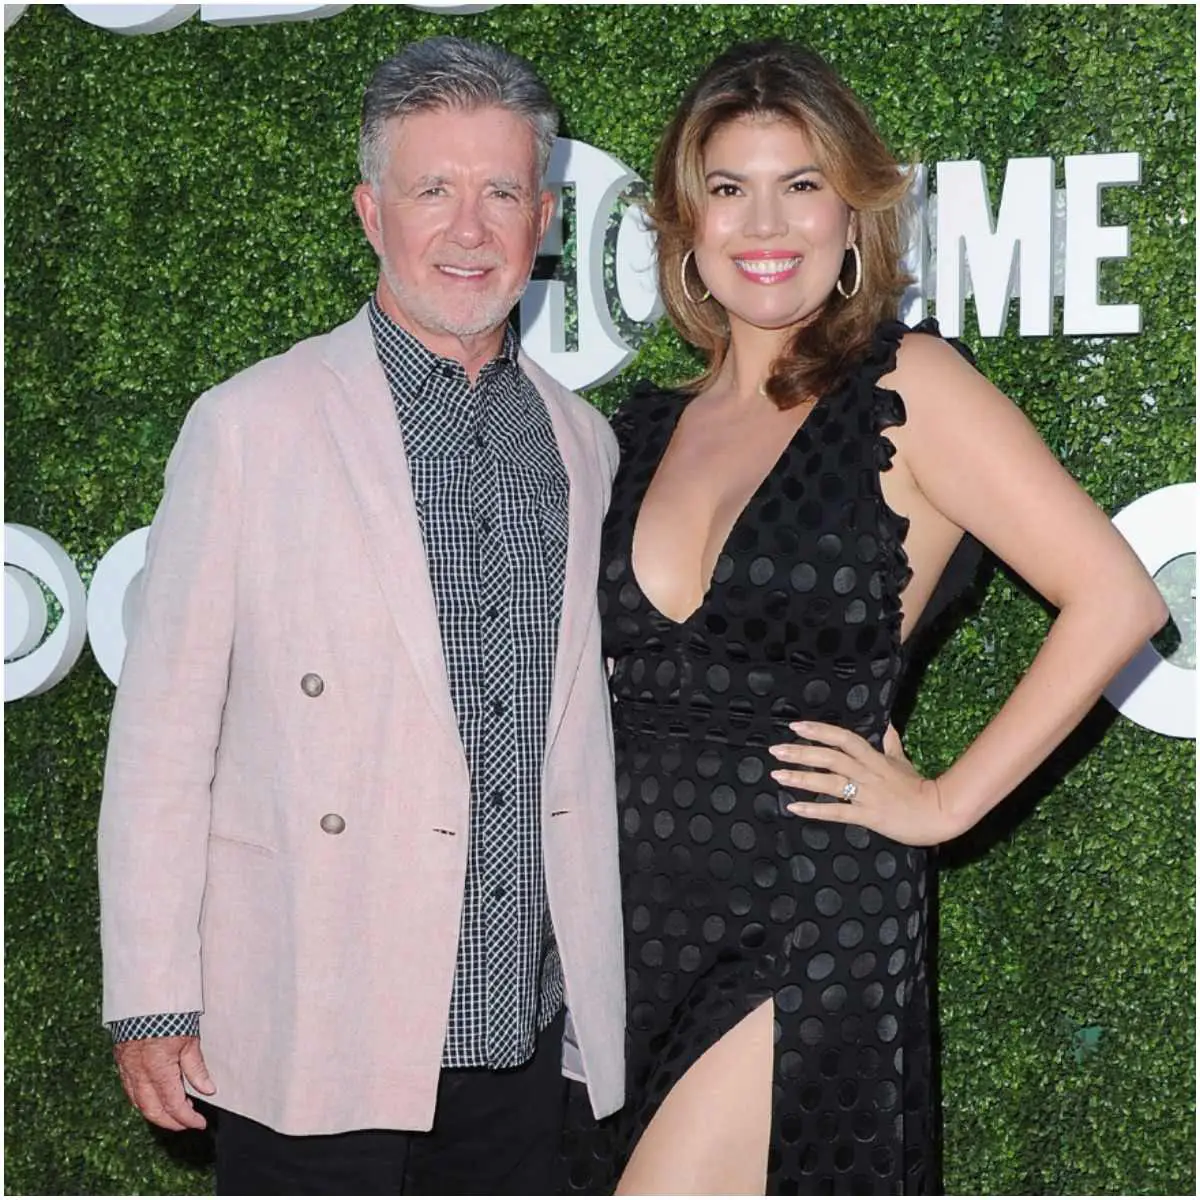 Alan Thicke and his wife Tanya Thicke